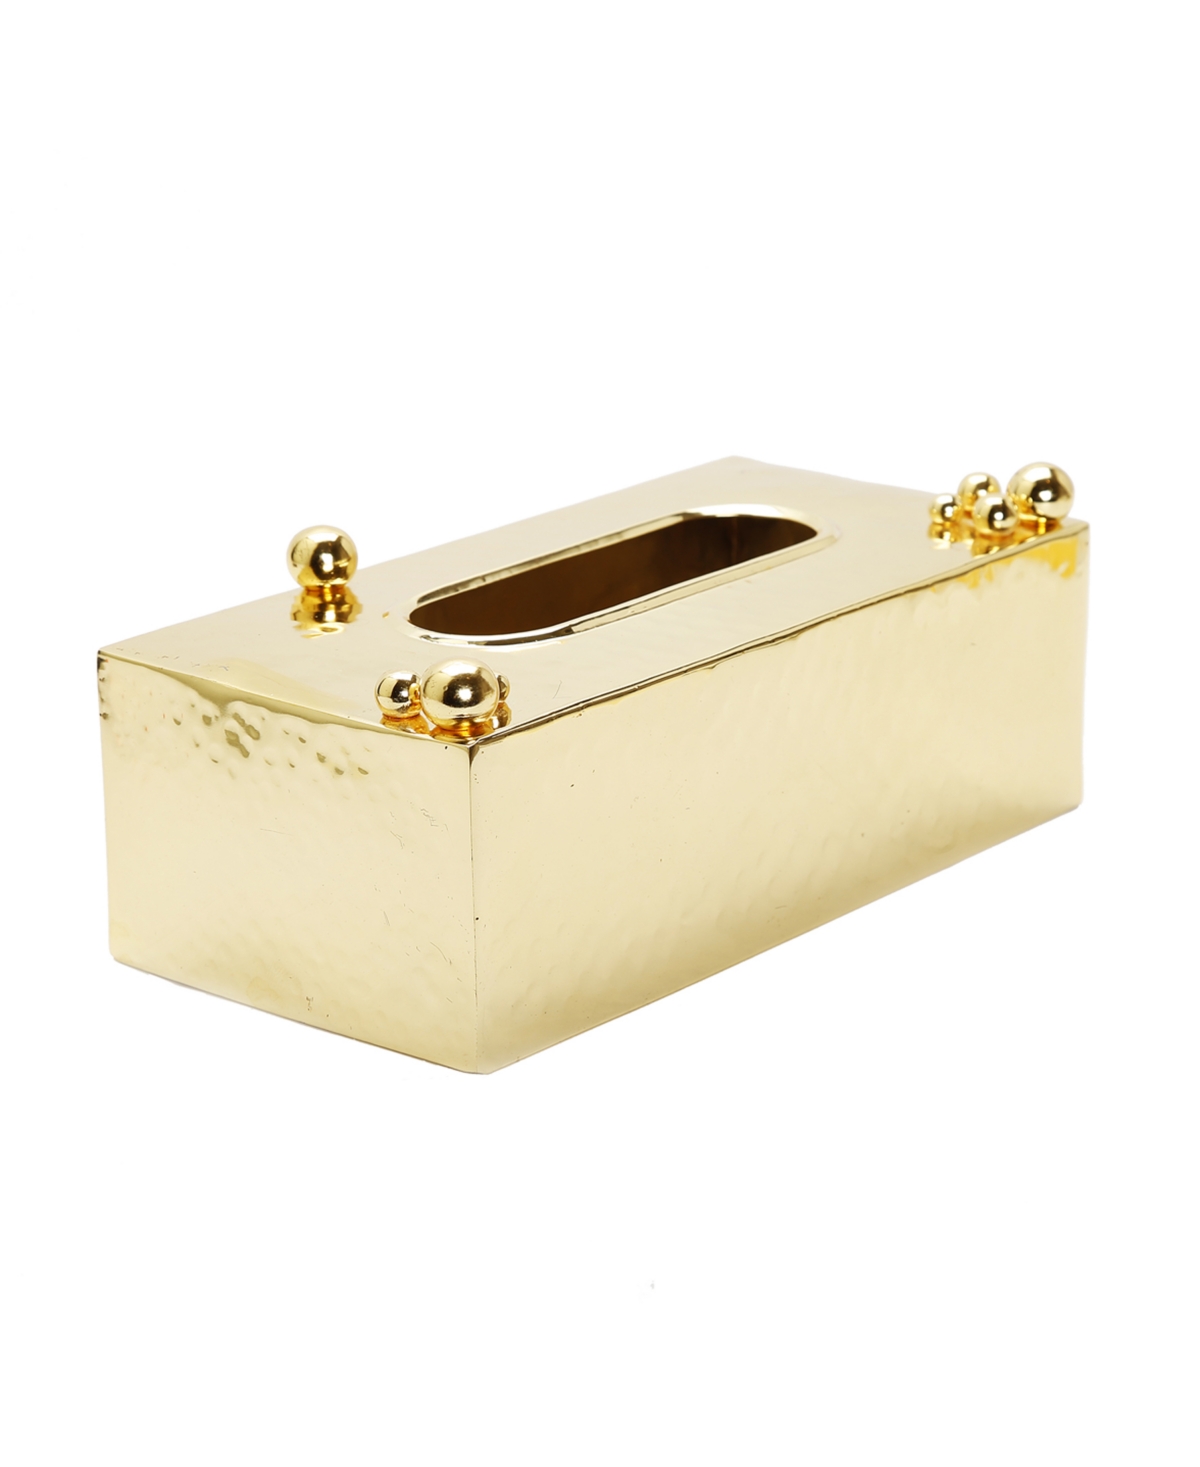 Hammered Tissue Box with Ball Design - Gold